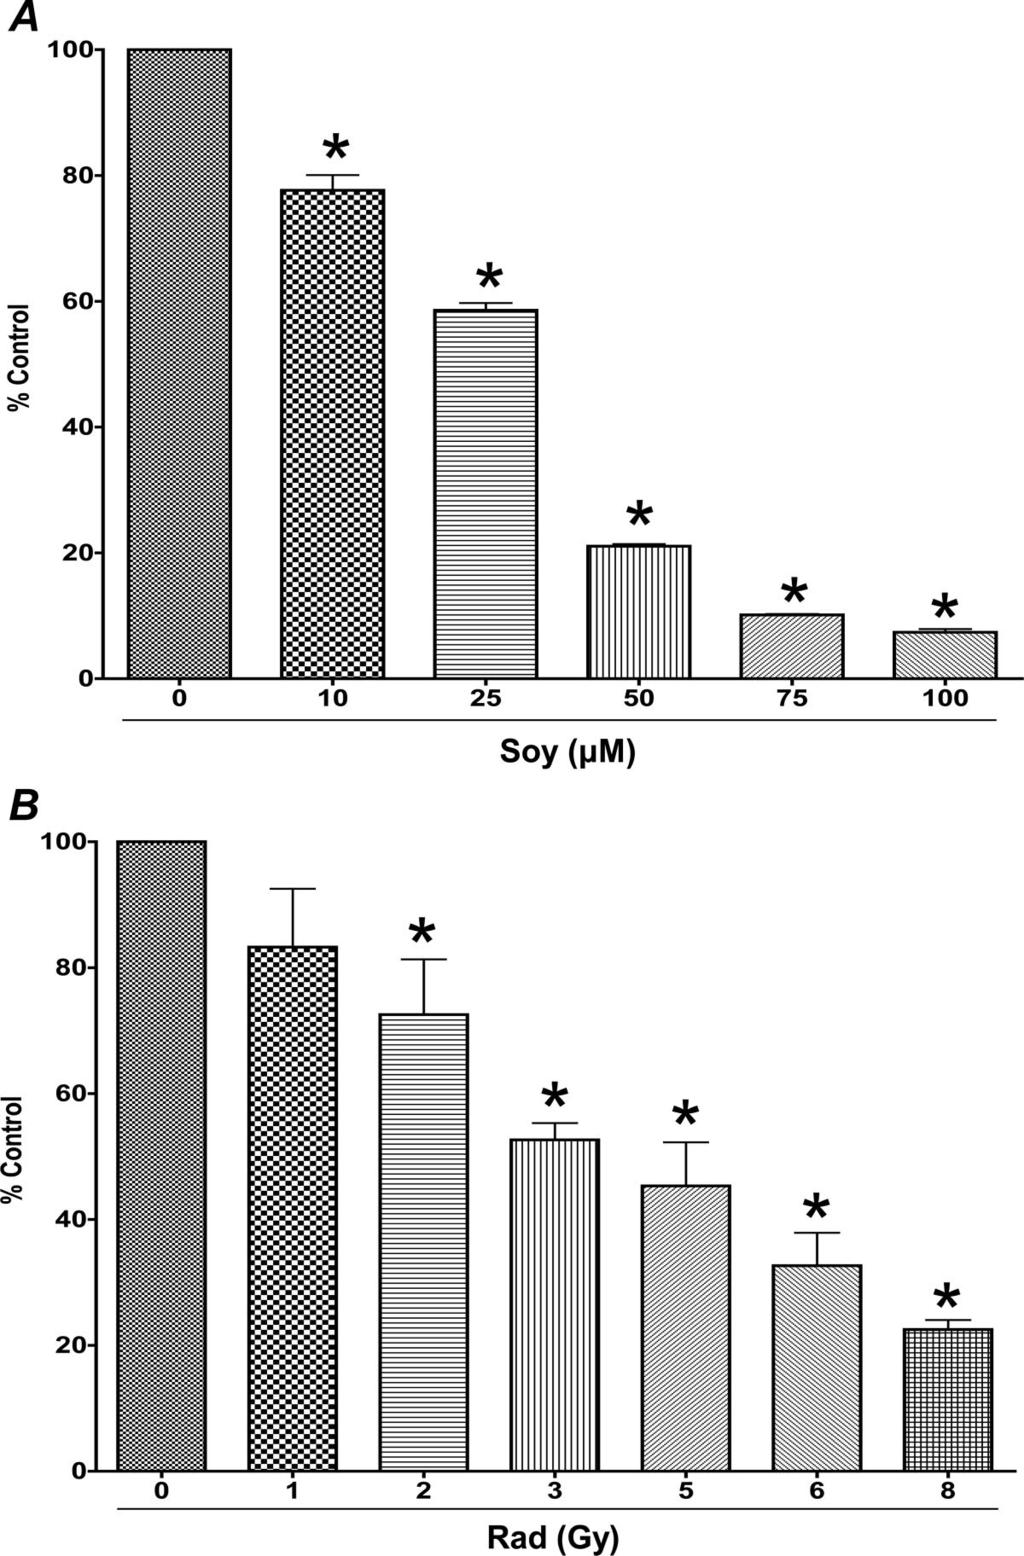 Journal of Thoracic Oncology Volume 6, Number 4, April 2011 Radiation and Soy for Non-small Cell Lung Carcinoma FIGURE 1. A549 cell growth inhibition by soy isoflavones and radiation.